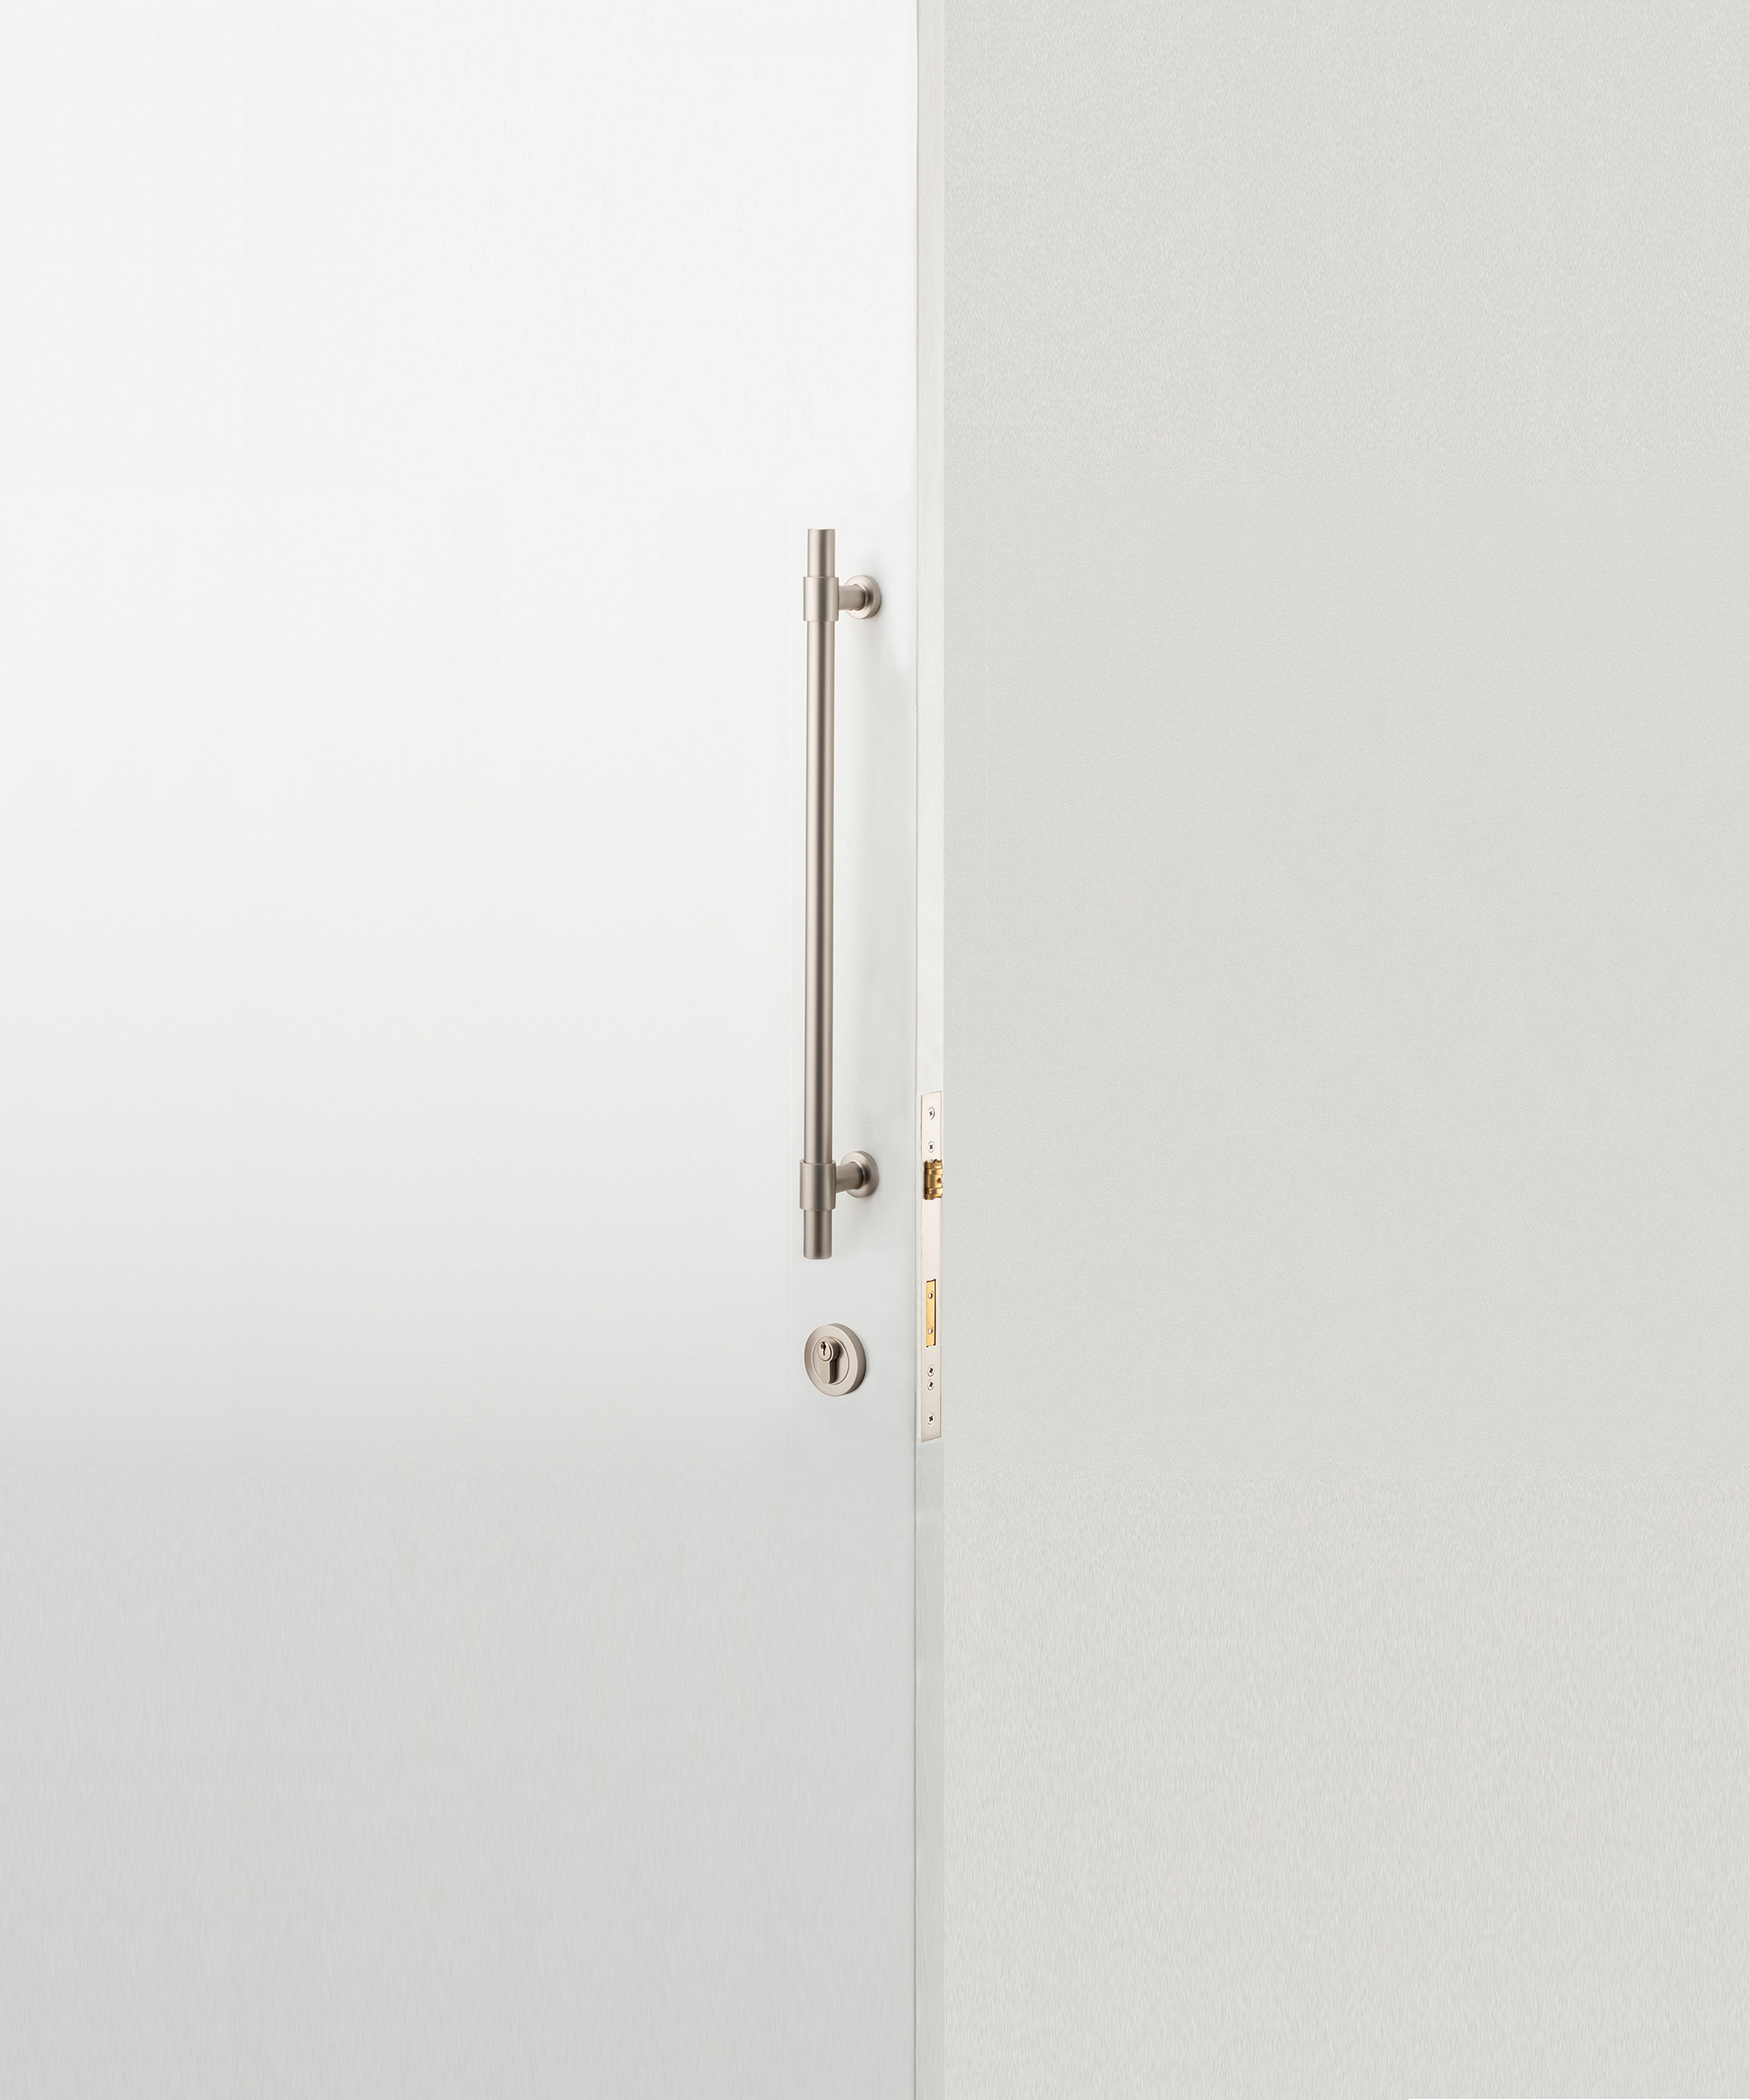 17102KENTR60KK - Sarlat Pull Handle - 600mm Entrance Kit with Separate High Security Lock - Brushed Gold PVD - Entrance